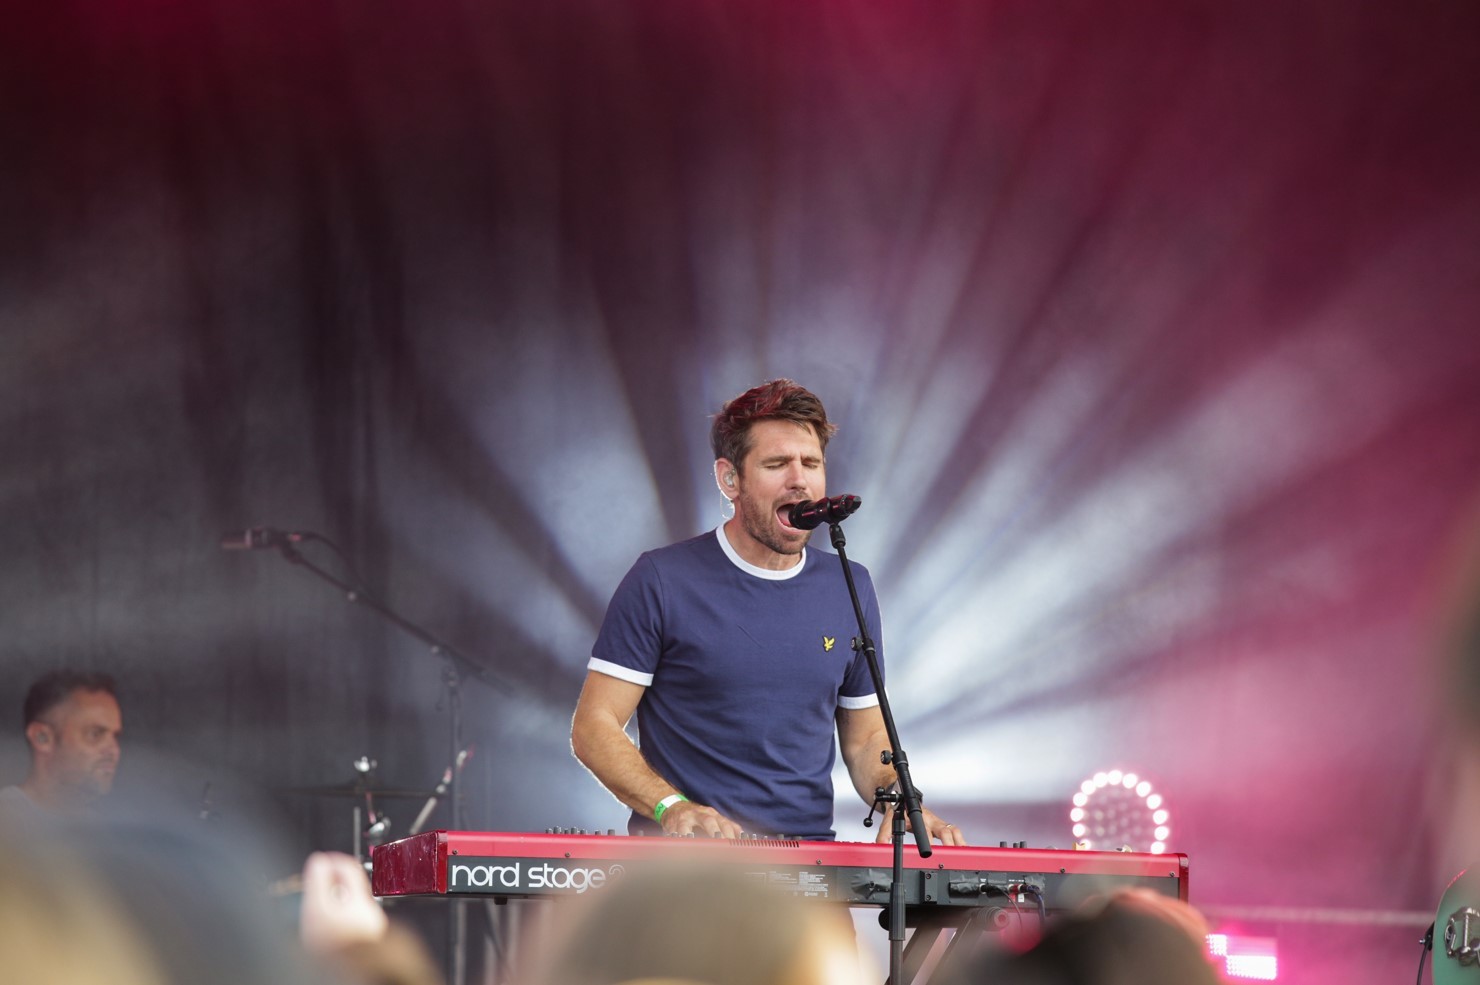 Roy Stride of Scouting For Girls